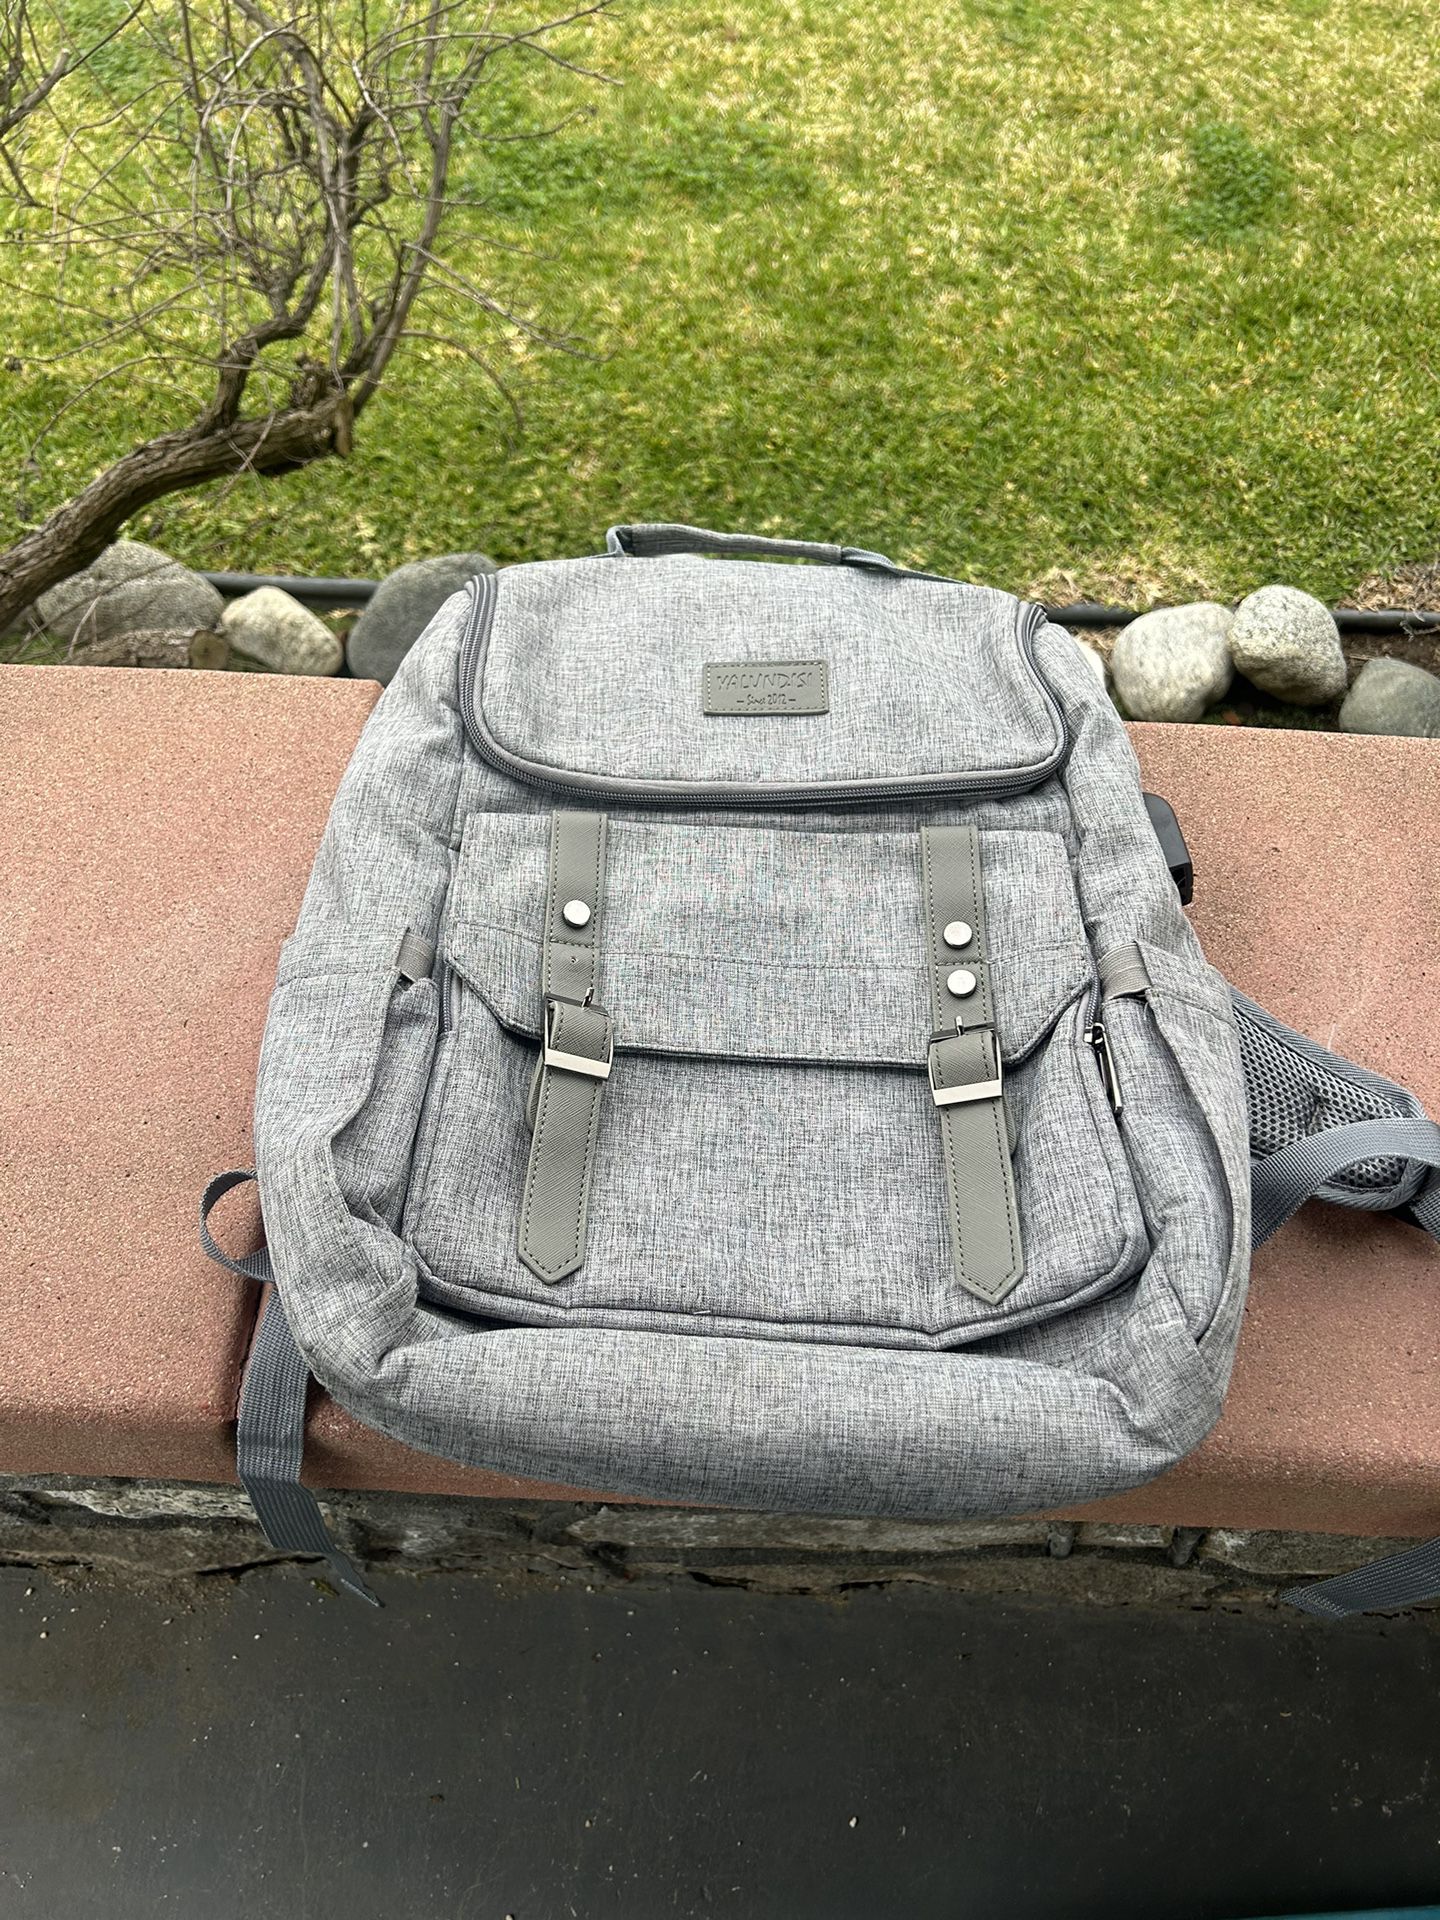 Backpack For Laptop